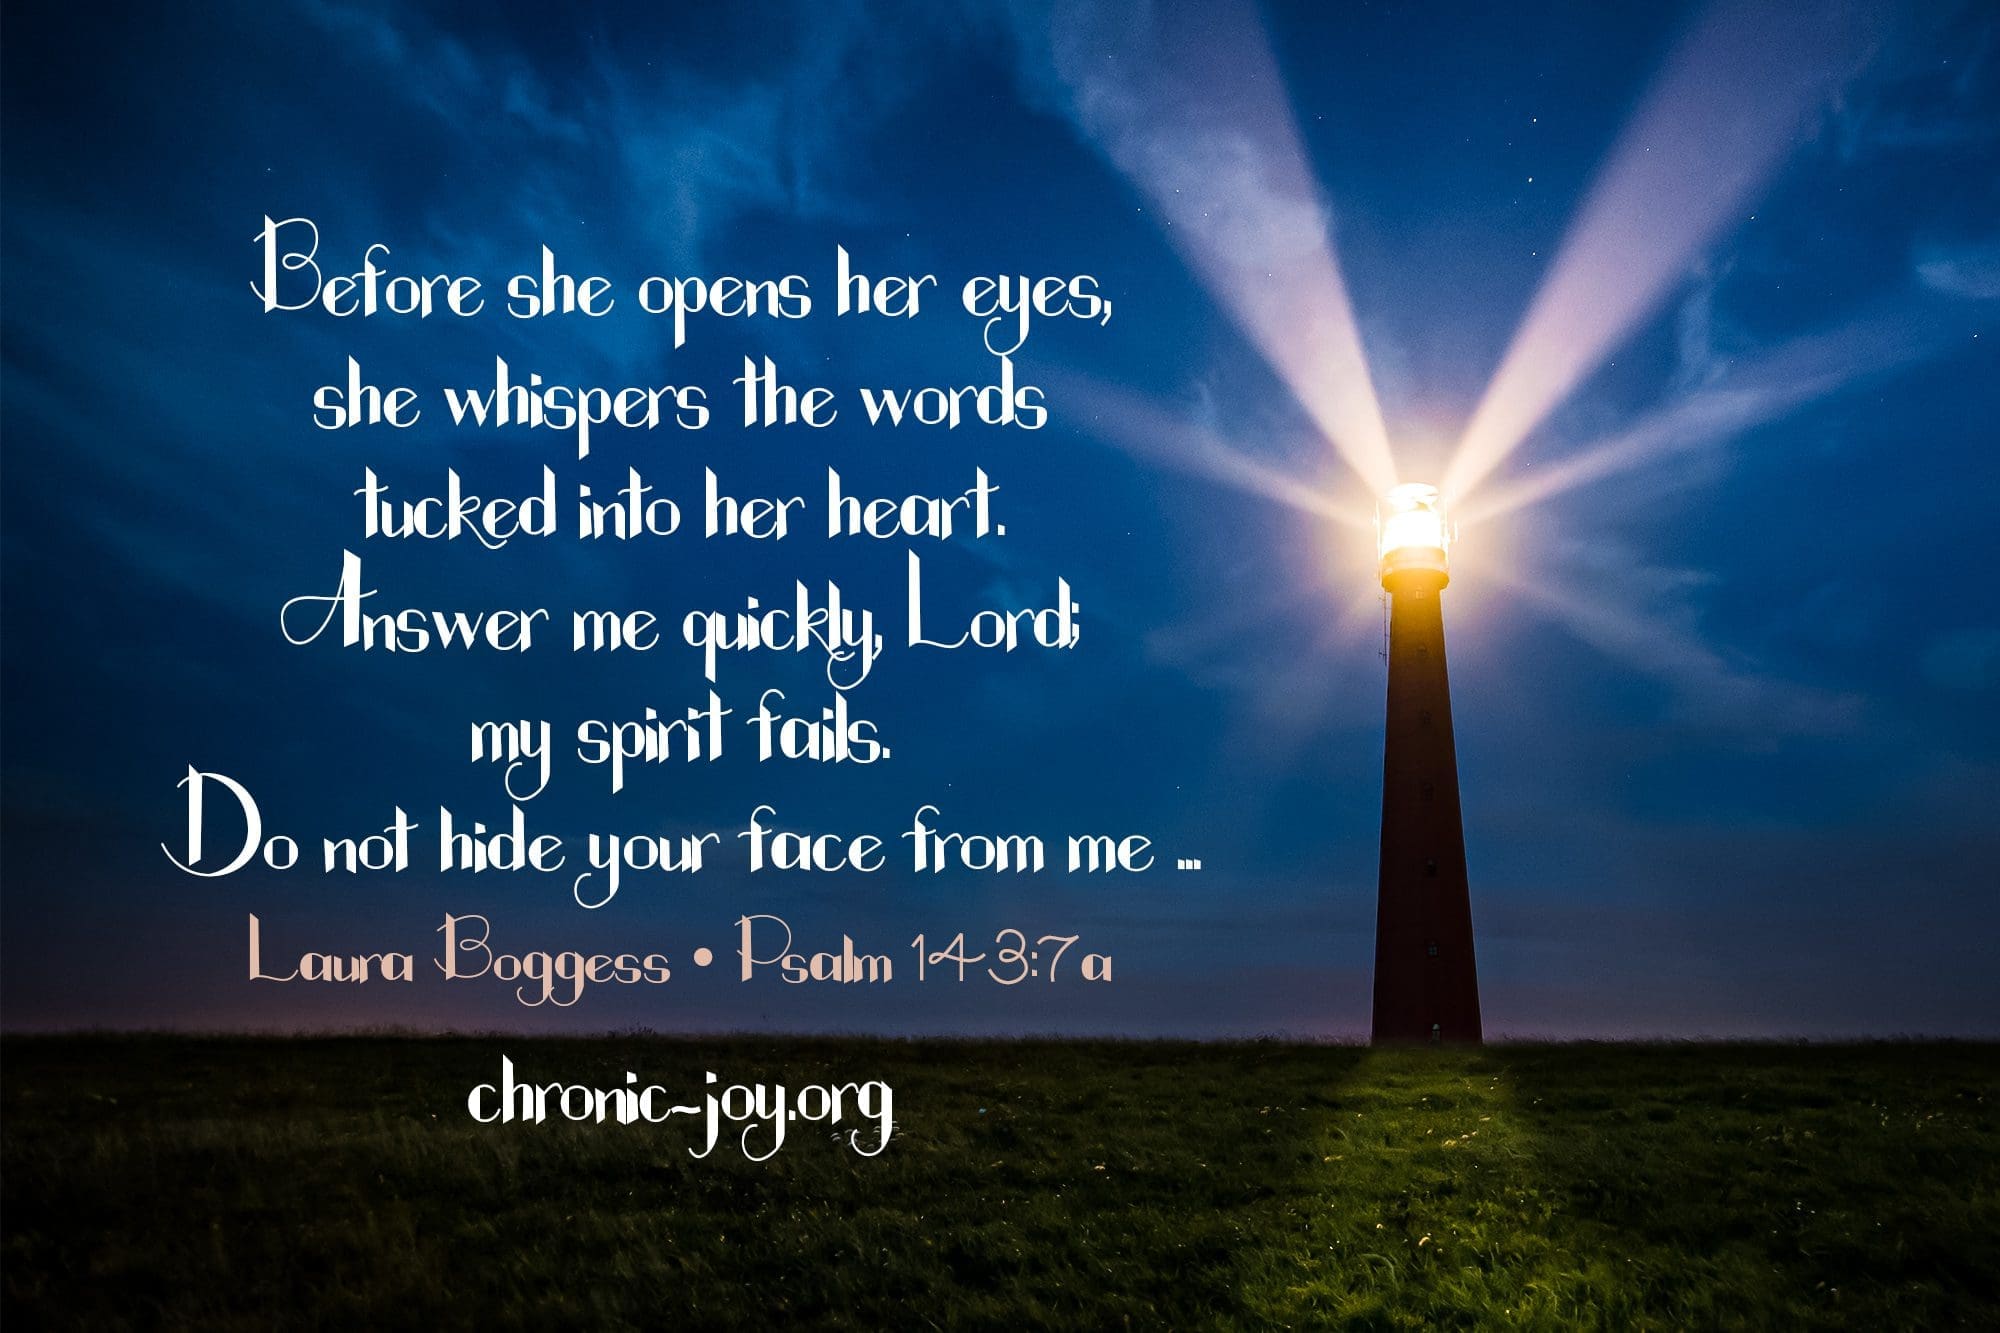 "Before she opens her eyes, she whispers the words tucked into her heart. Answer me quickly, Lord: my spirit fails. Do not hide your face from me ... Laura Boggess • Psalm 143:7a